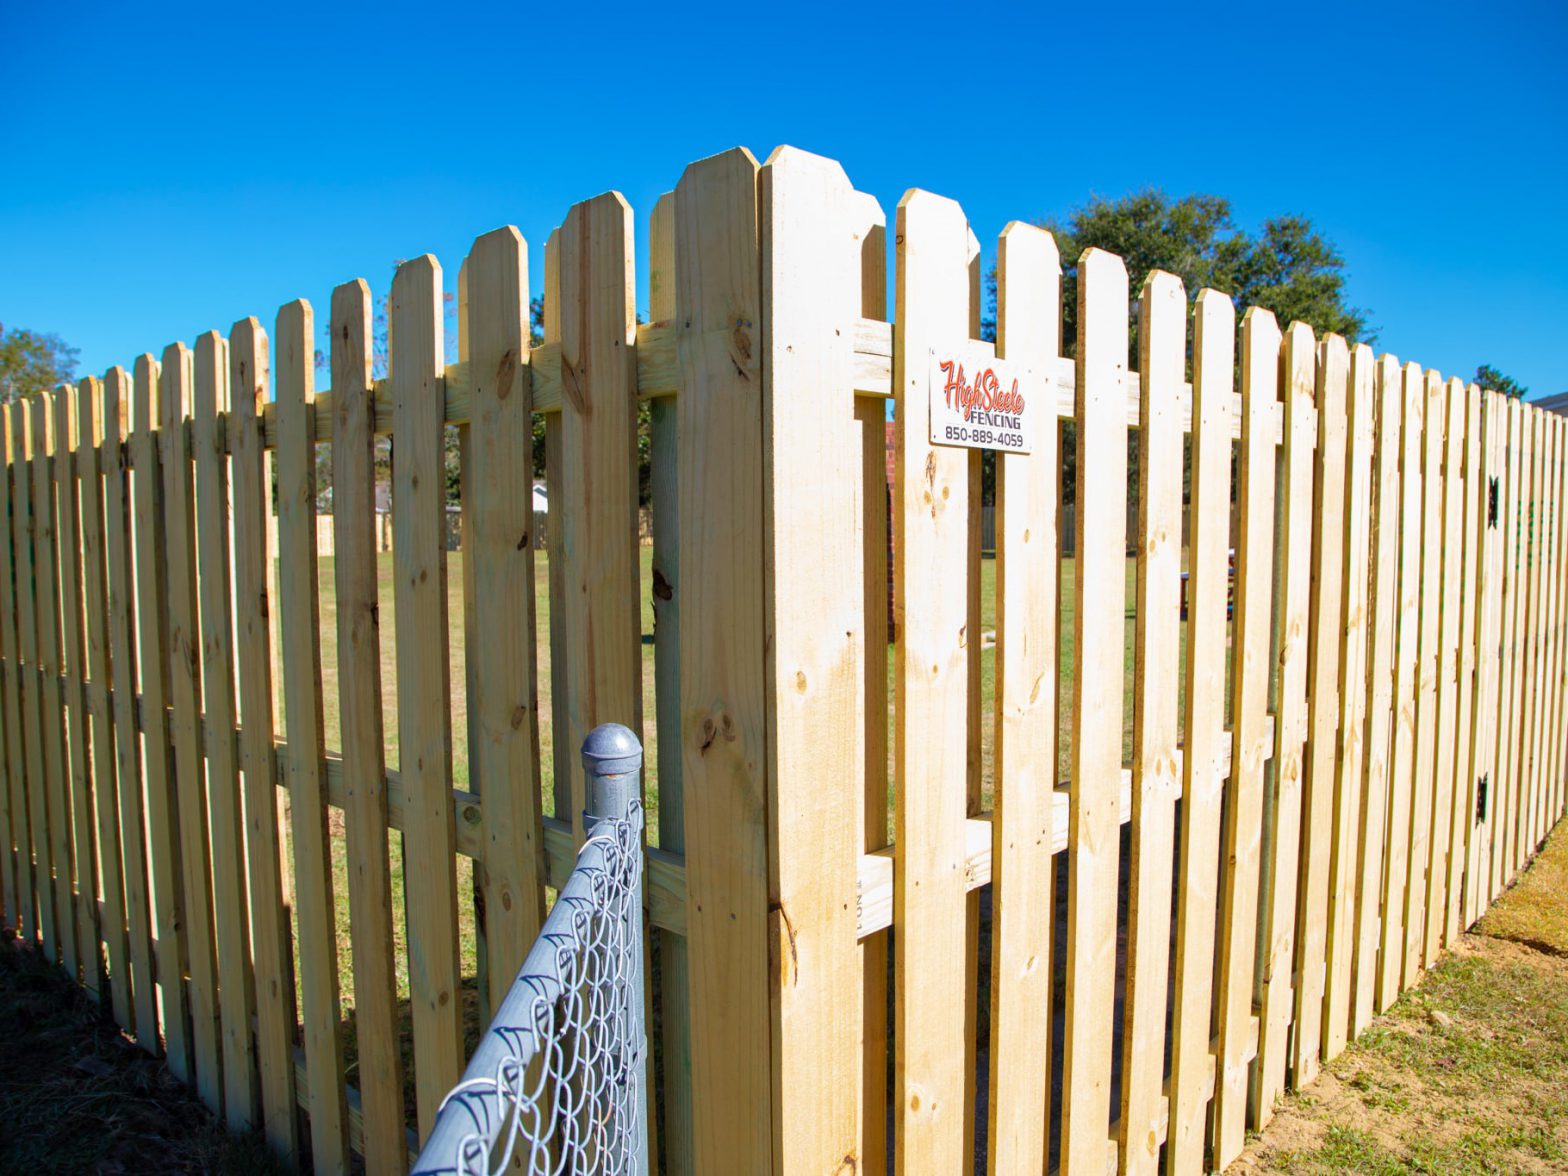 Photo of a wood fence from the outside corner view